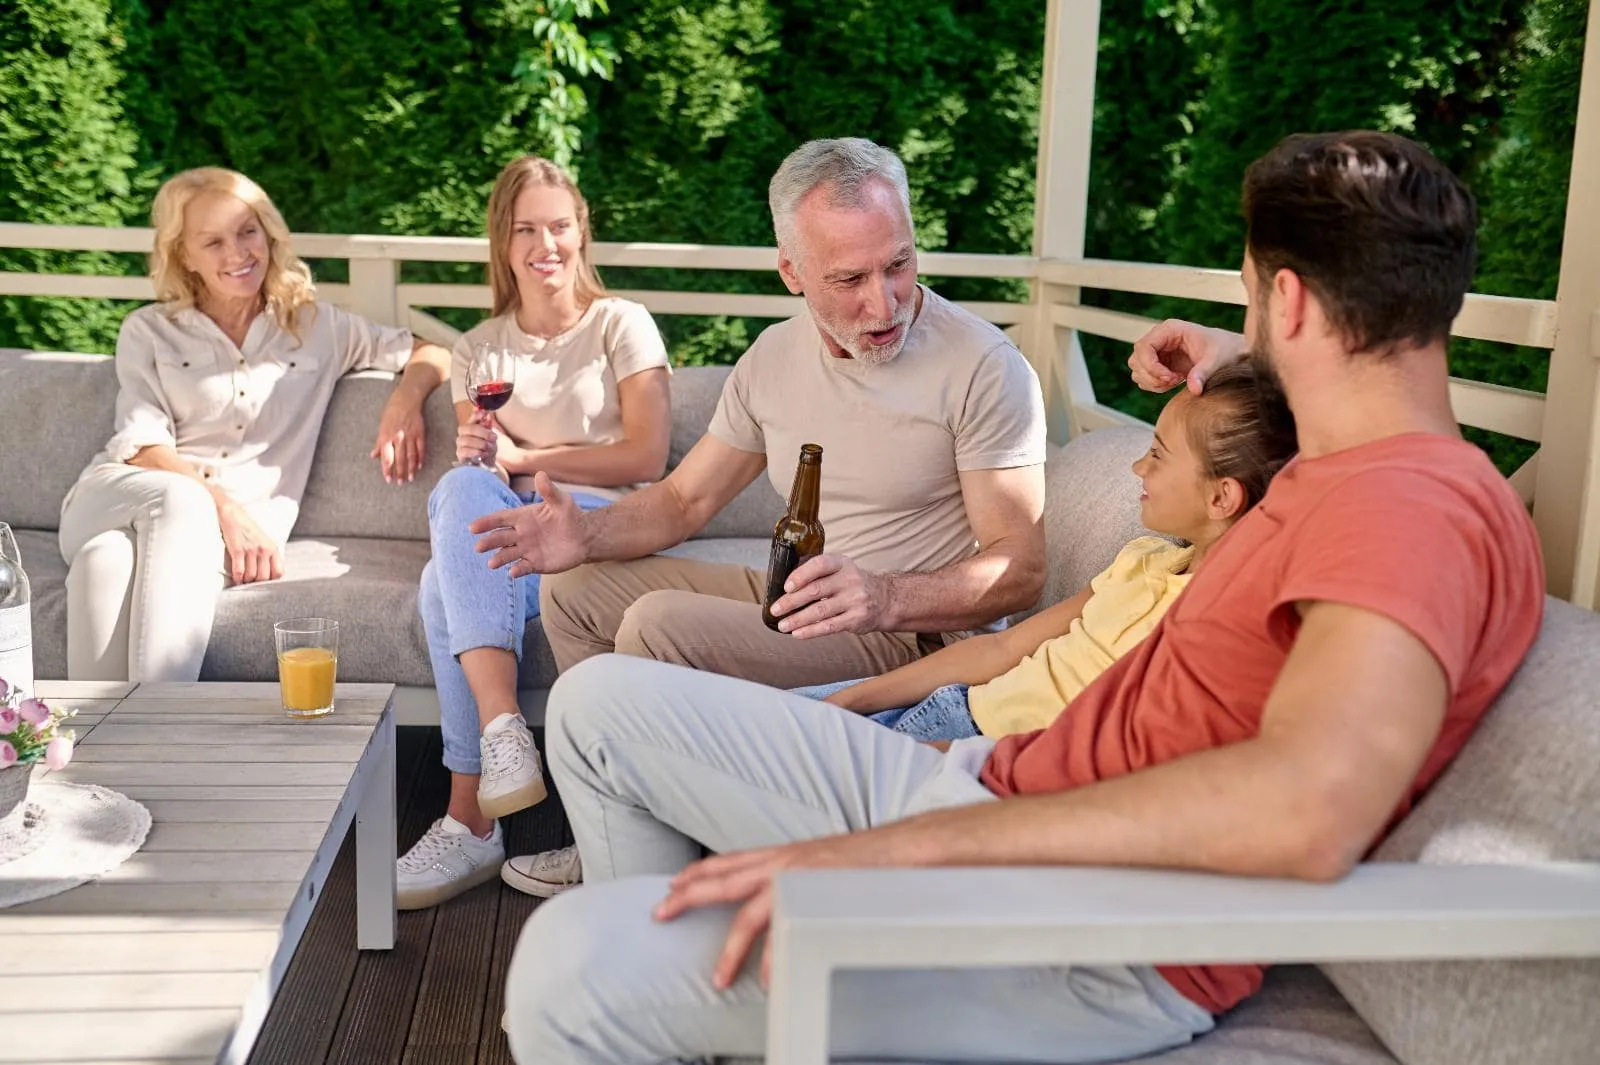 Family members lounging on a patio in their backyard.